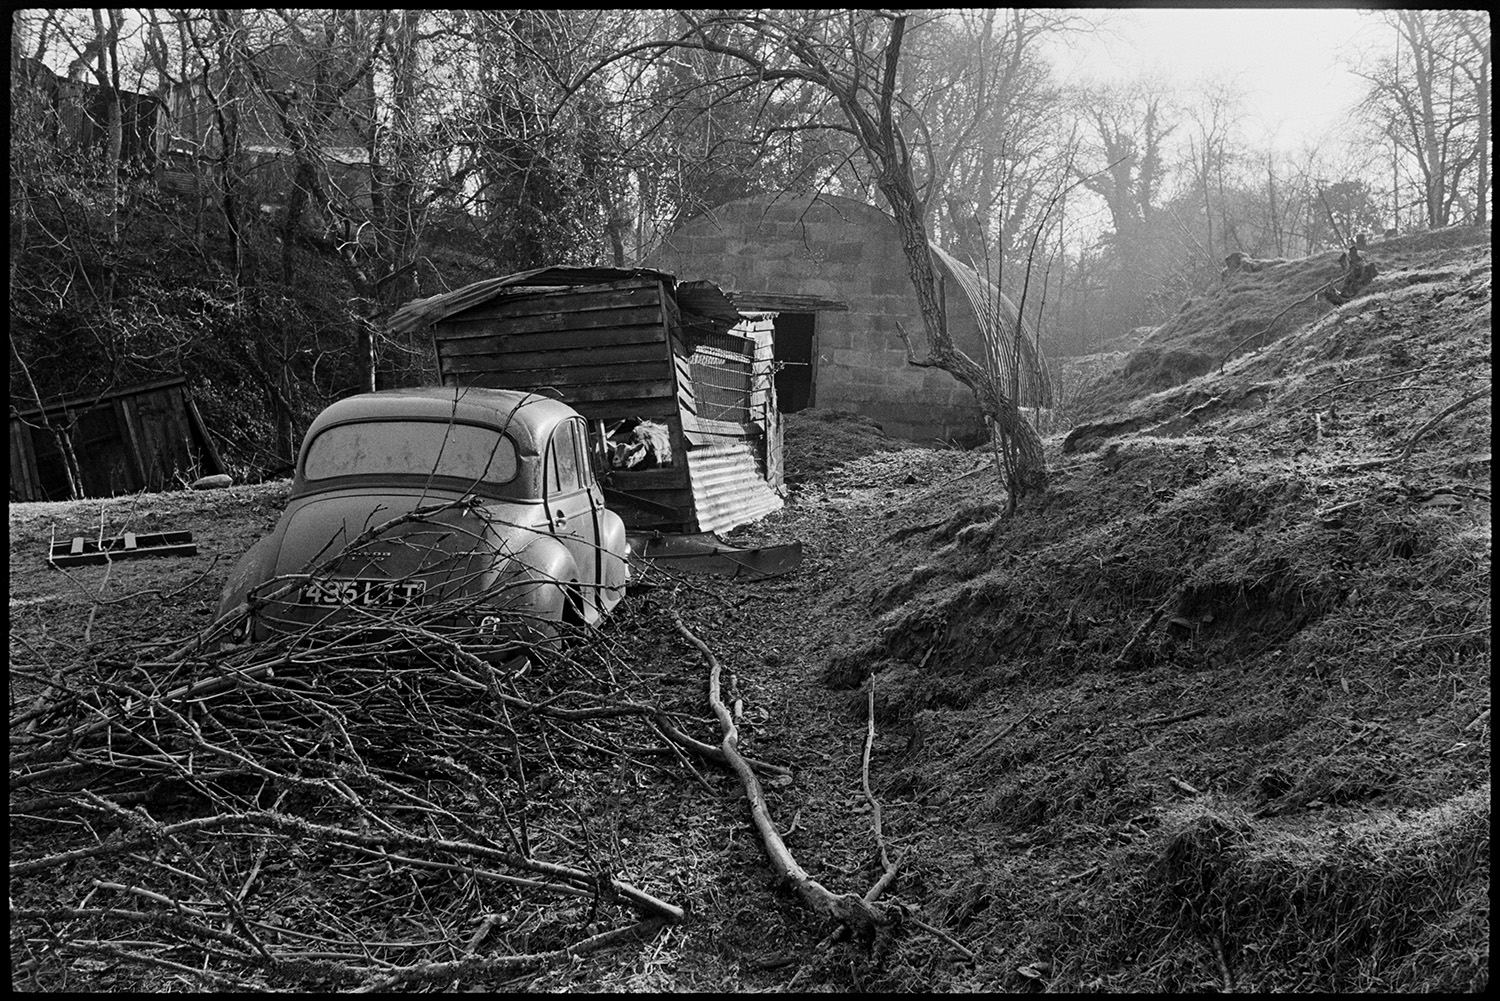 Smallholding with old car used for poultry and old shed. 
[A collapsing wooden shed, nissen hut and an old Morris Minor car, which is being used as a poultry house, in a small clearing surrounded by trees at Millhams, Dolton. A small pile of branches is visible in the foreground by the car.]